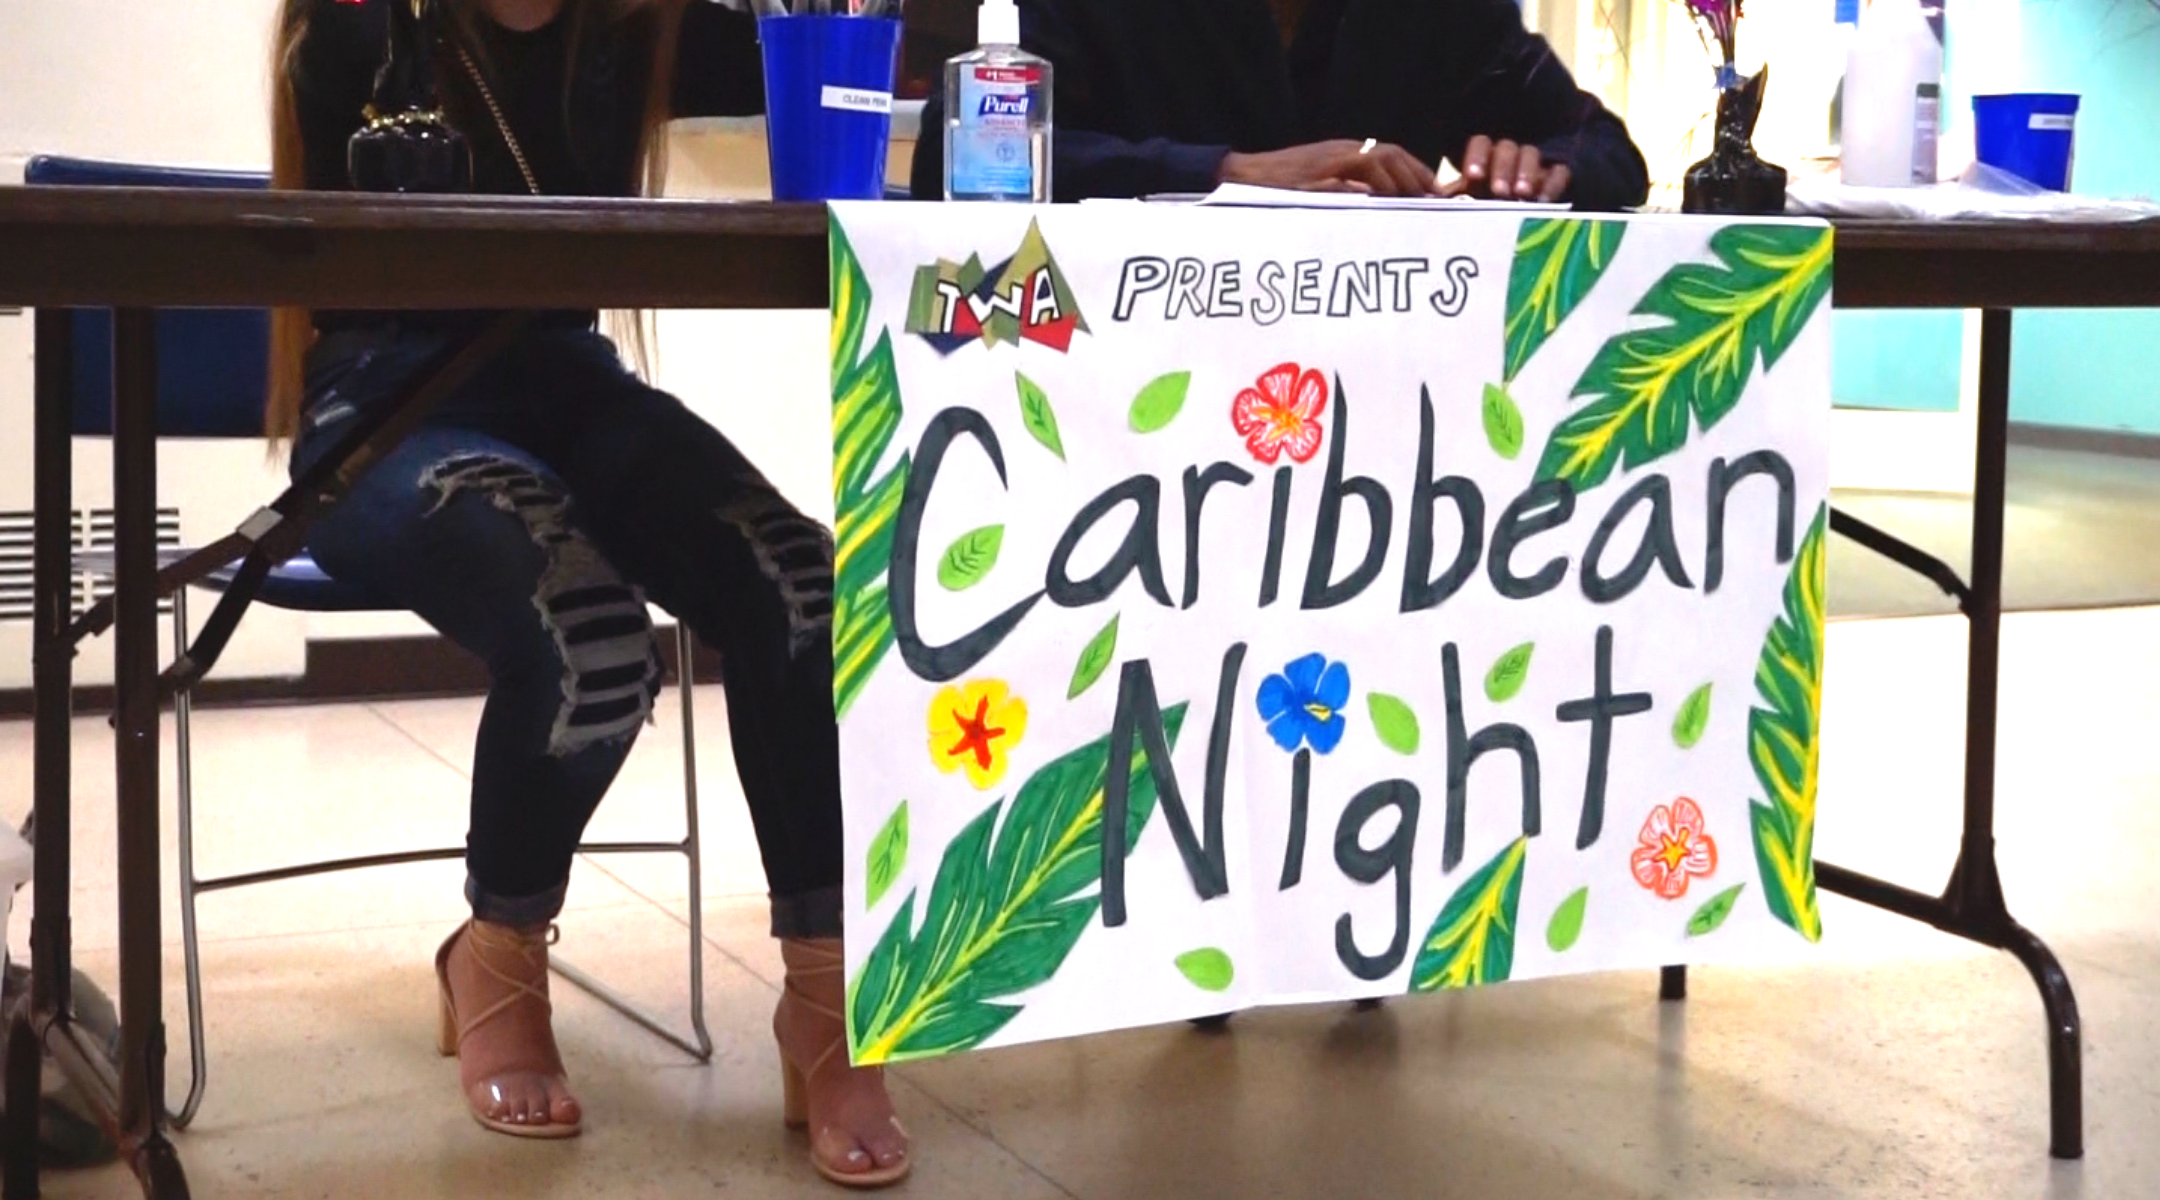 A poster sign for Caribbean night at Worcester State taped to a table with students sitting behind it